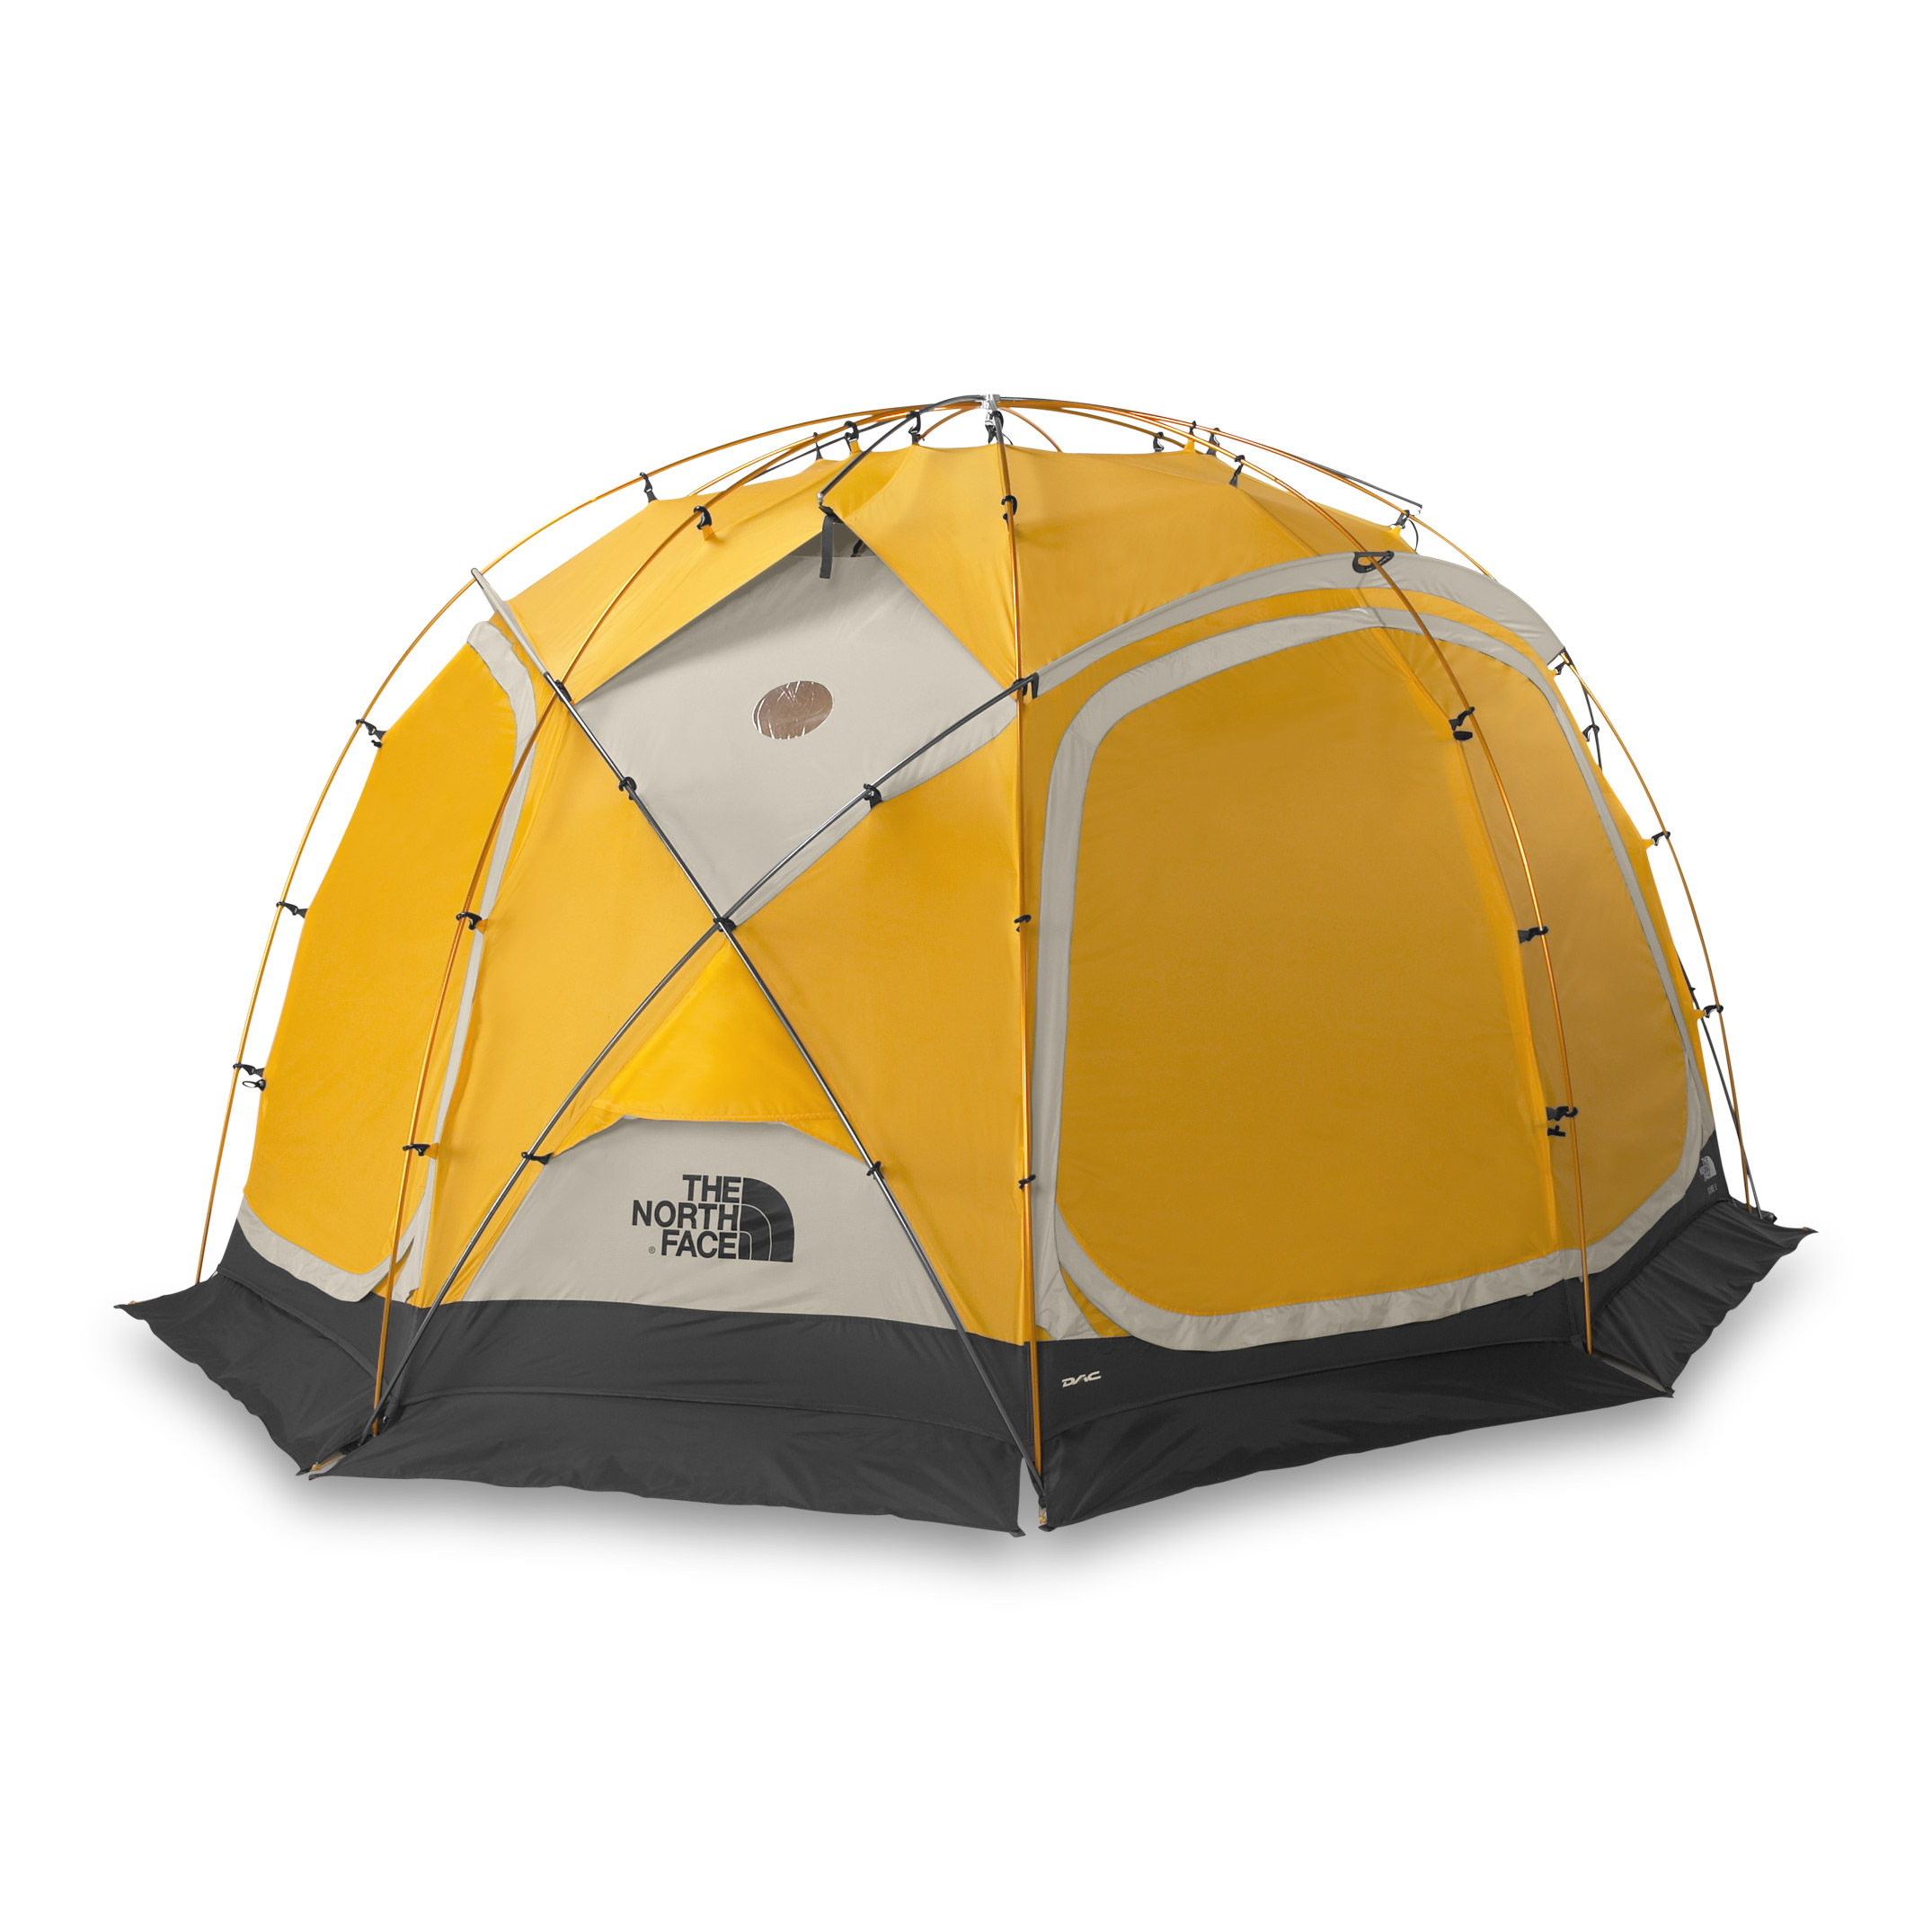 The North Face Dome 8 Expedition Tent at NorwaySports.com Archive